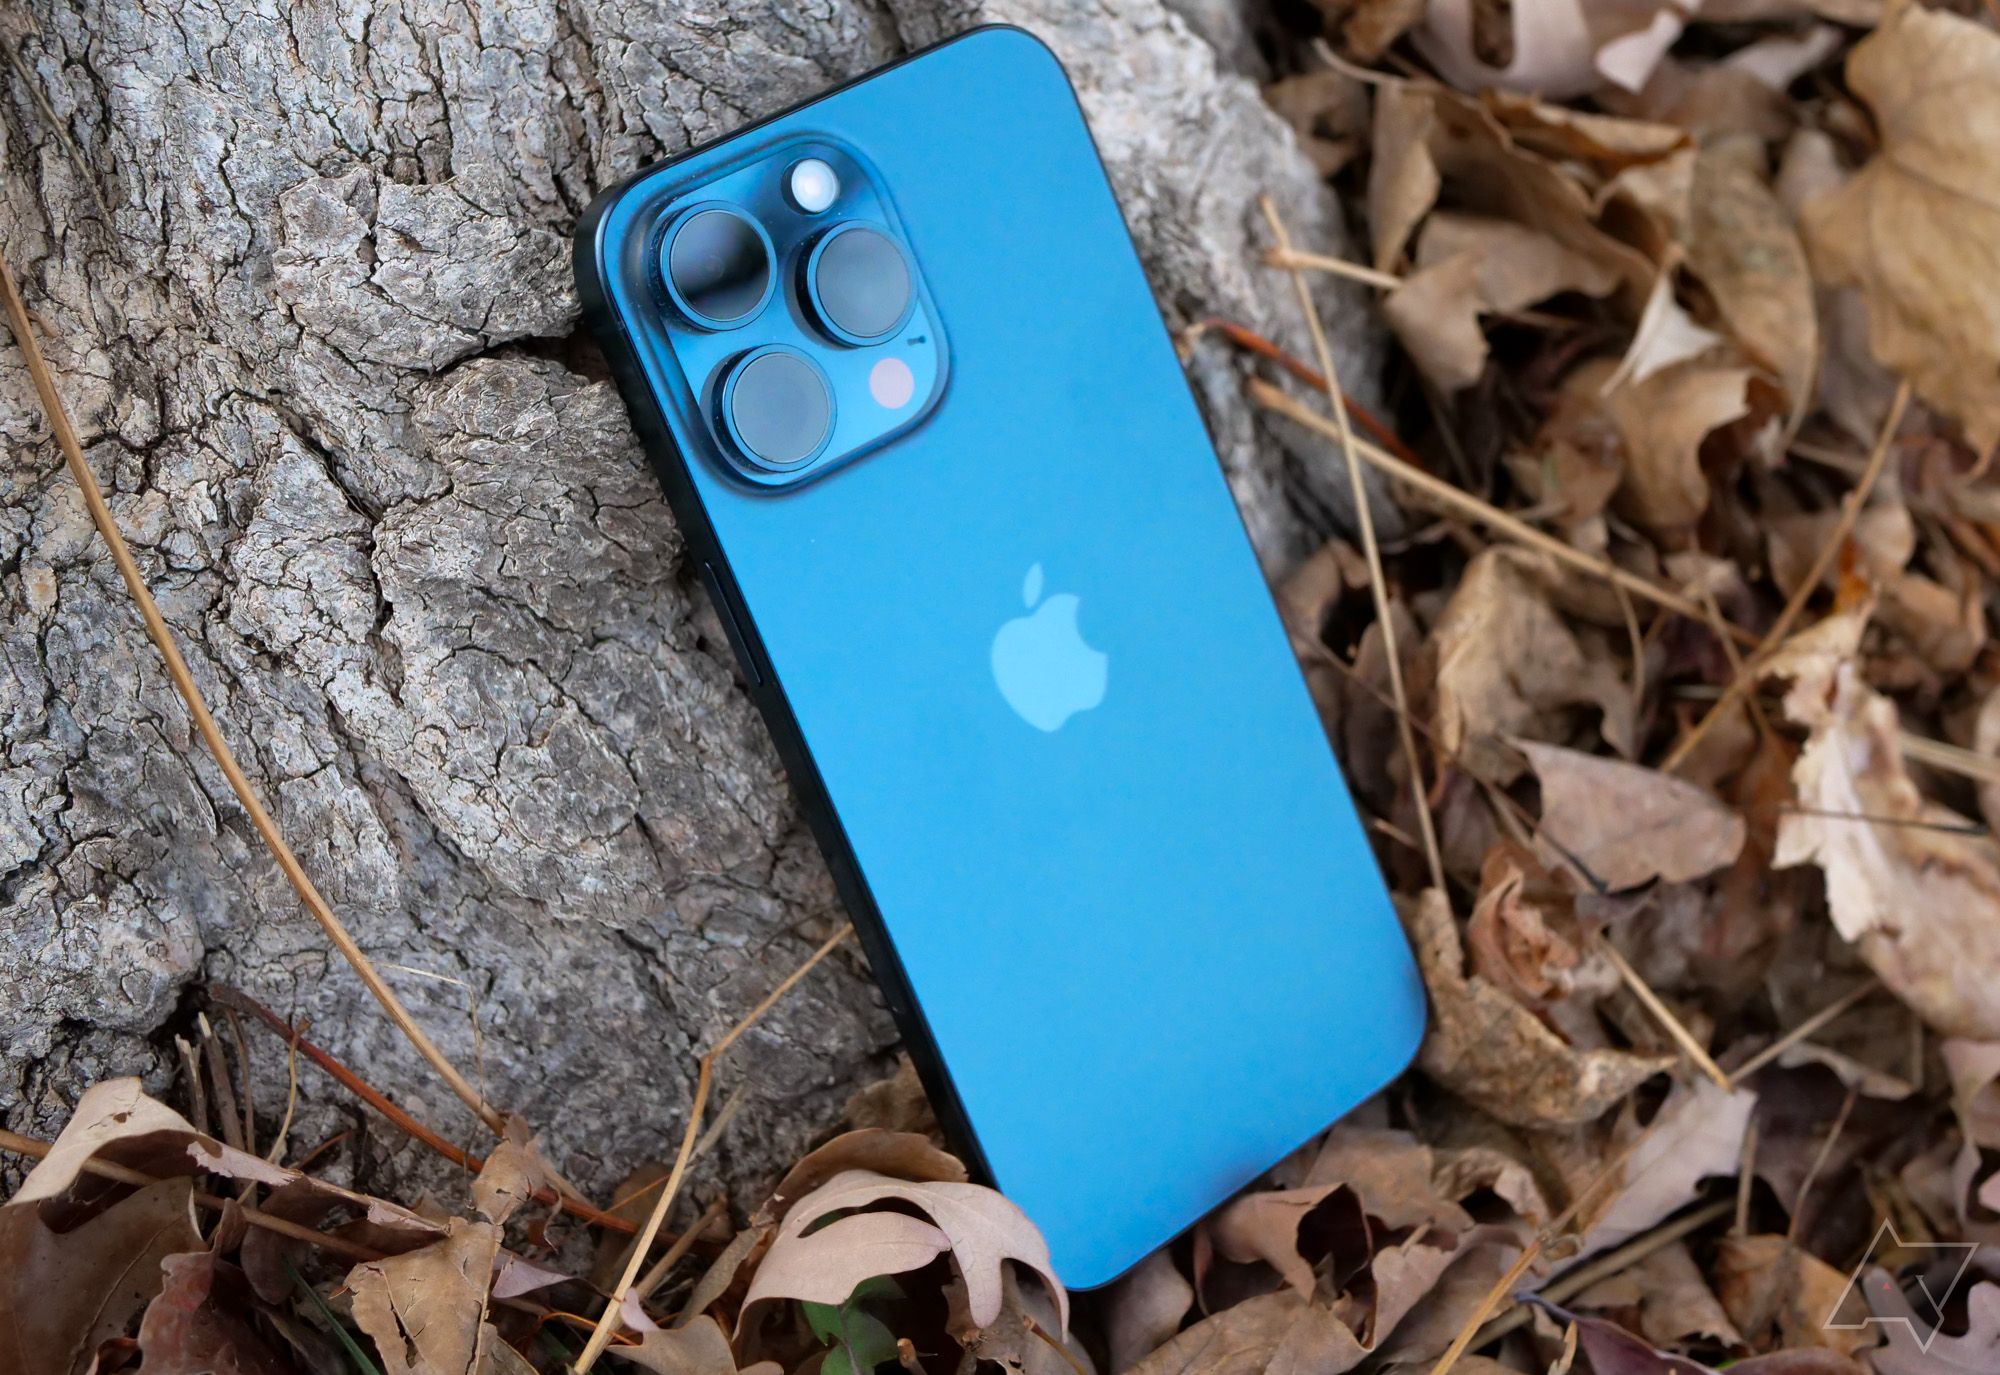 The iPhone 15 Pro Max leaning against a tree with scattered leaves